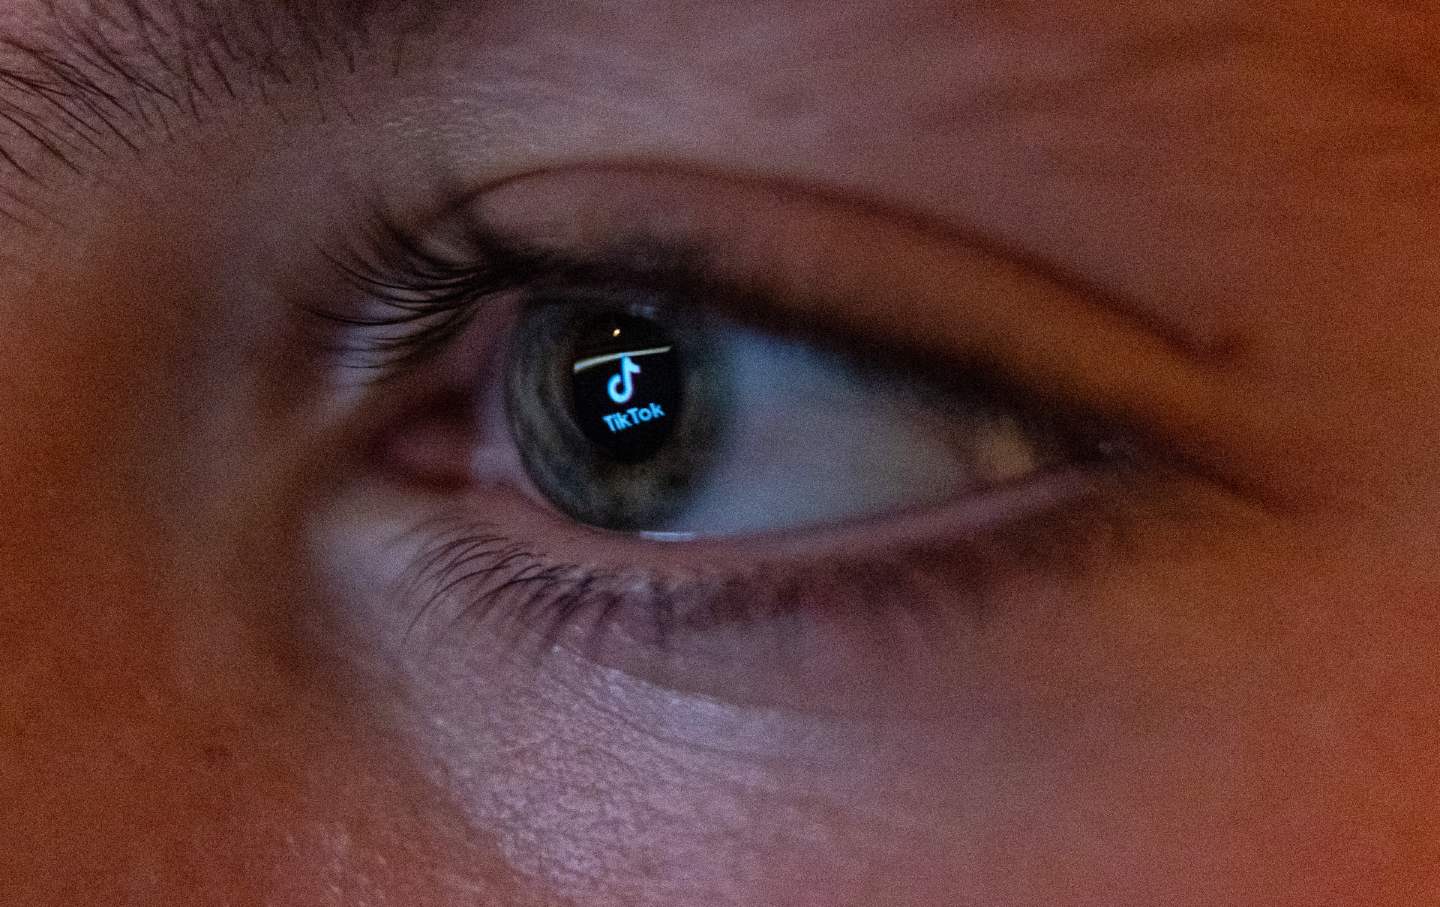 The TikTok social media platform's logo is reflected in the eye of a 13-year-old boy as he looks at a computer screen in Bath, England.